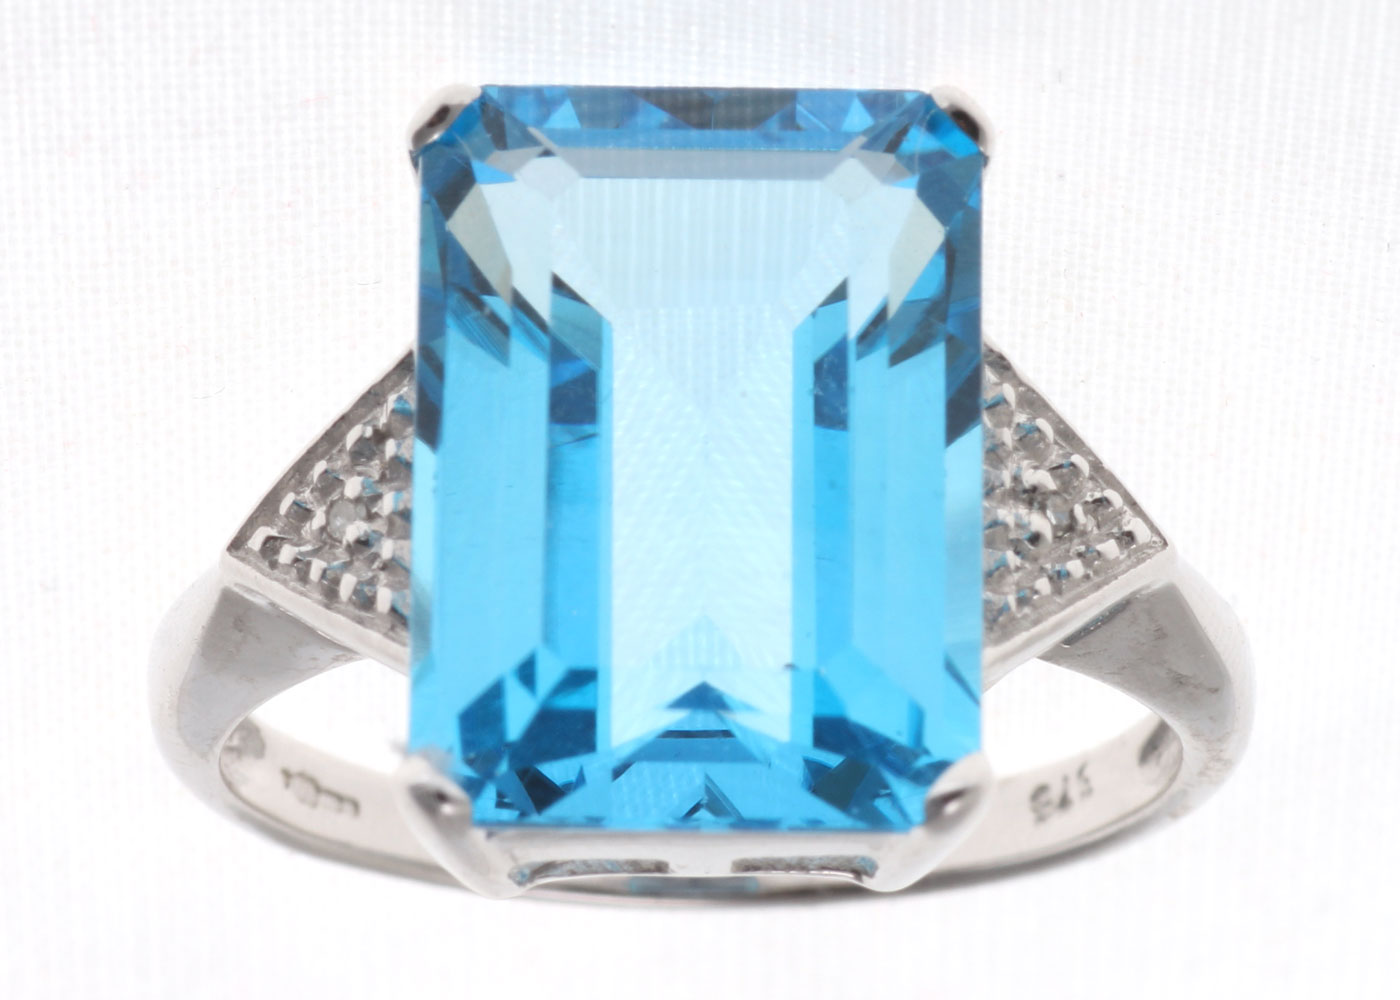 9k White Gold Diamond And Blue Topaz Ring 8.25 Carats - Image 6 of 6